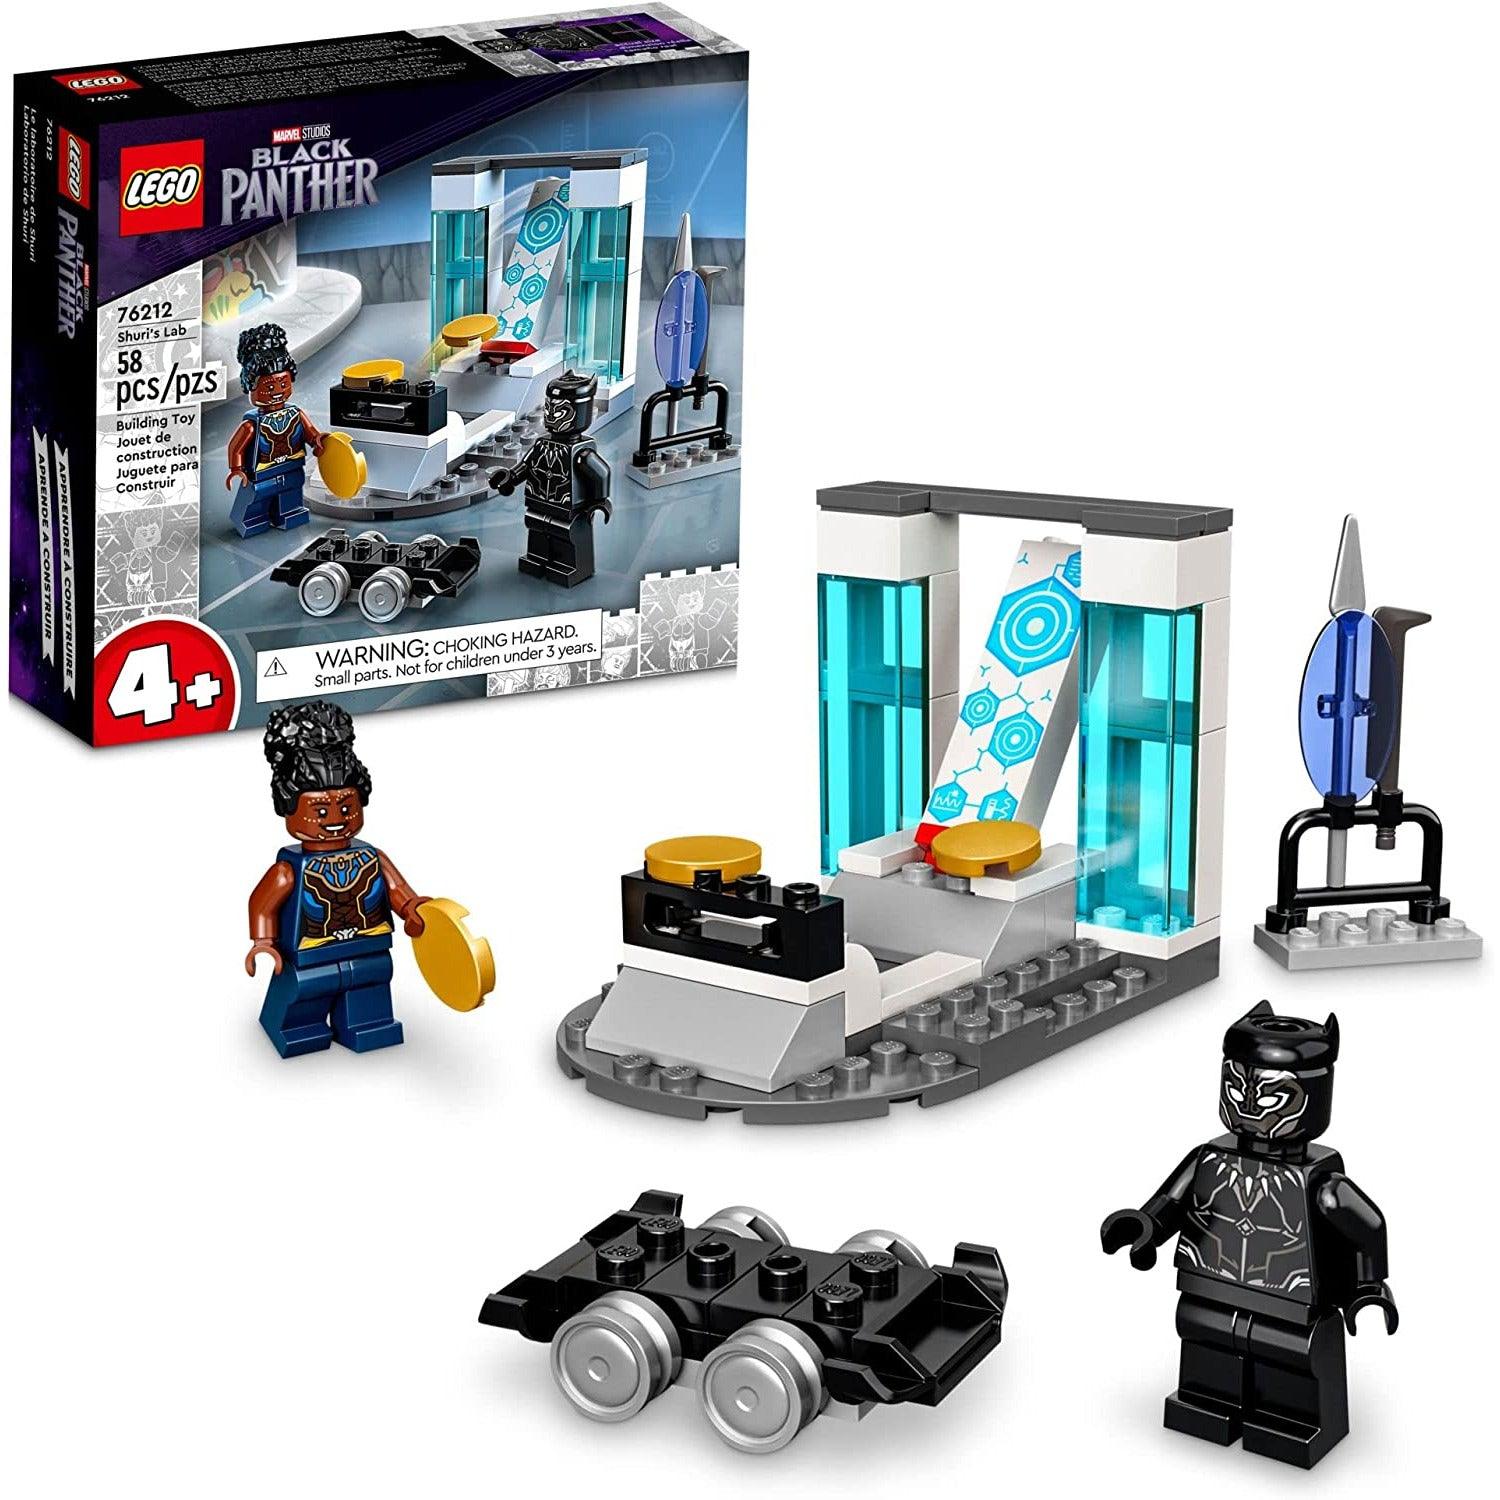 LEGO 76212 Marvel Shuri's Lab, Black Panther Construction Learning Toy with Minifigures